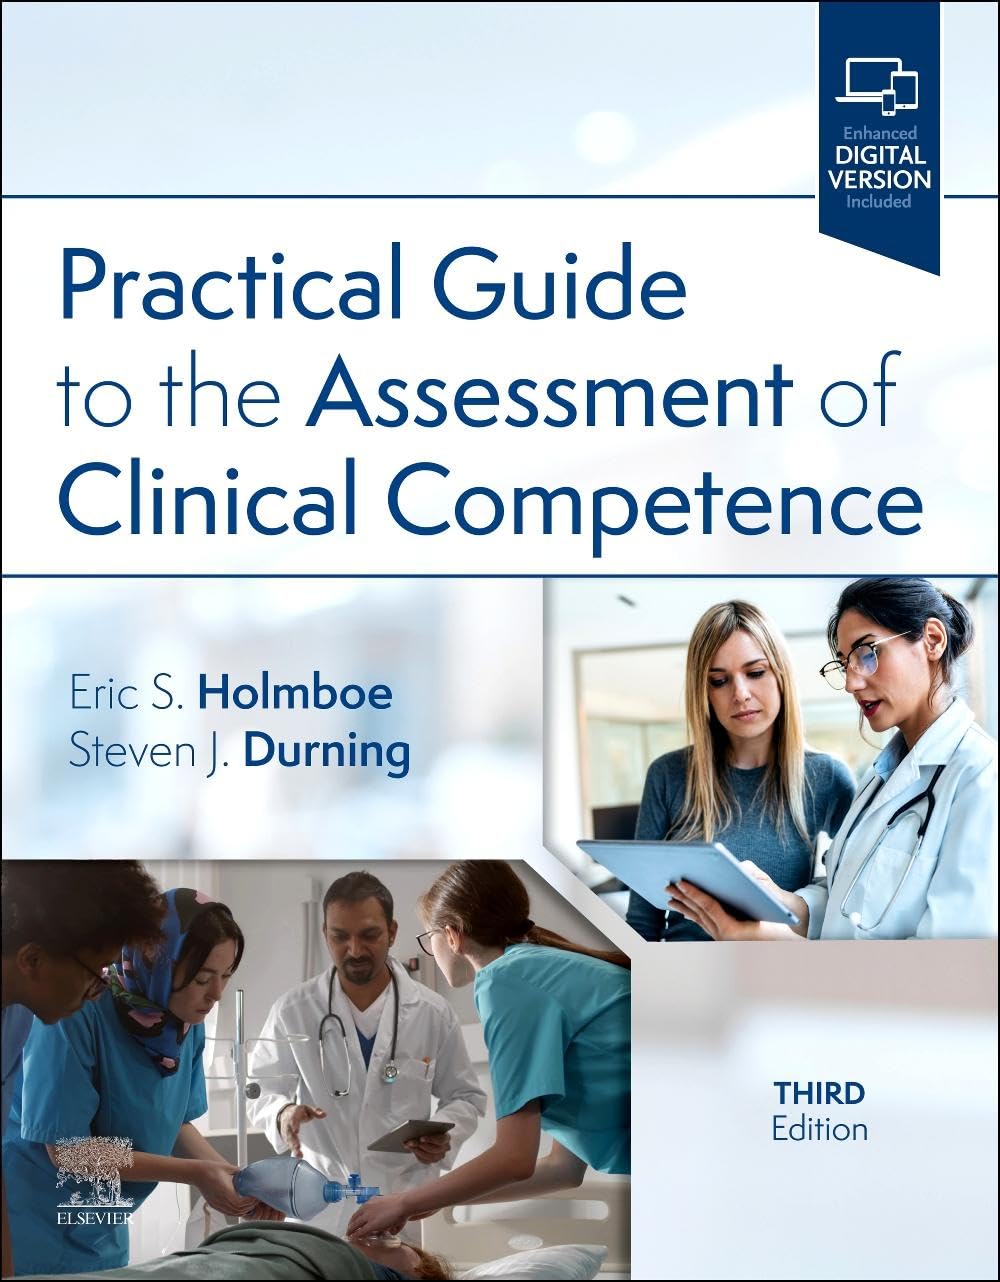 (EBook PDF)Practical Guide to the Assessment of Clinical Competence, 3rd Edition by Eric S. Holmboe MD MACP FRCP, Steven James Durning MD PhD MACP